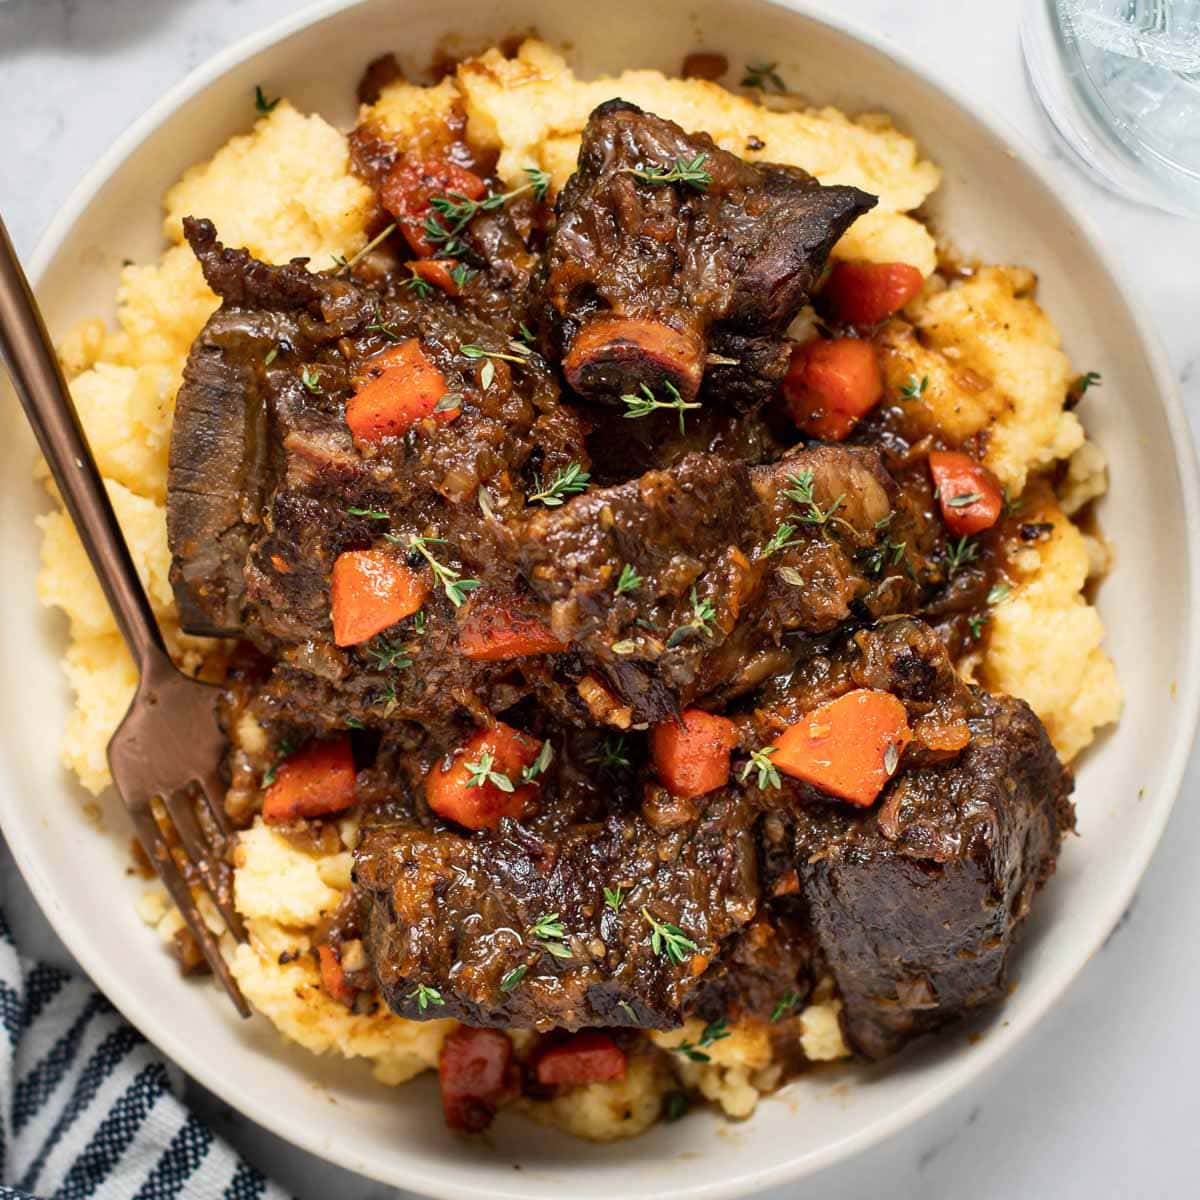 Oven Braised Short Ribs with Creamy Polenta